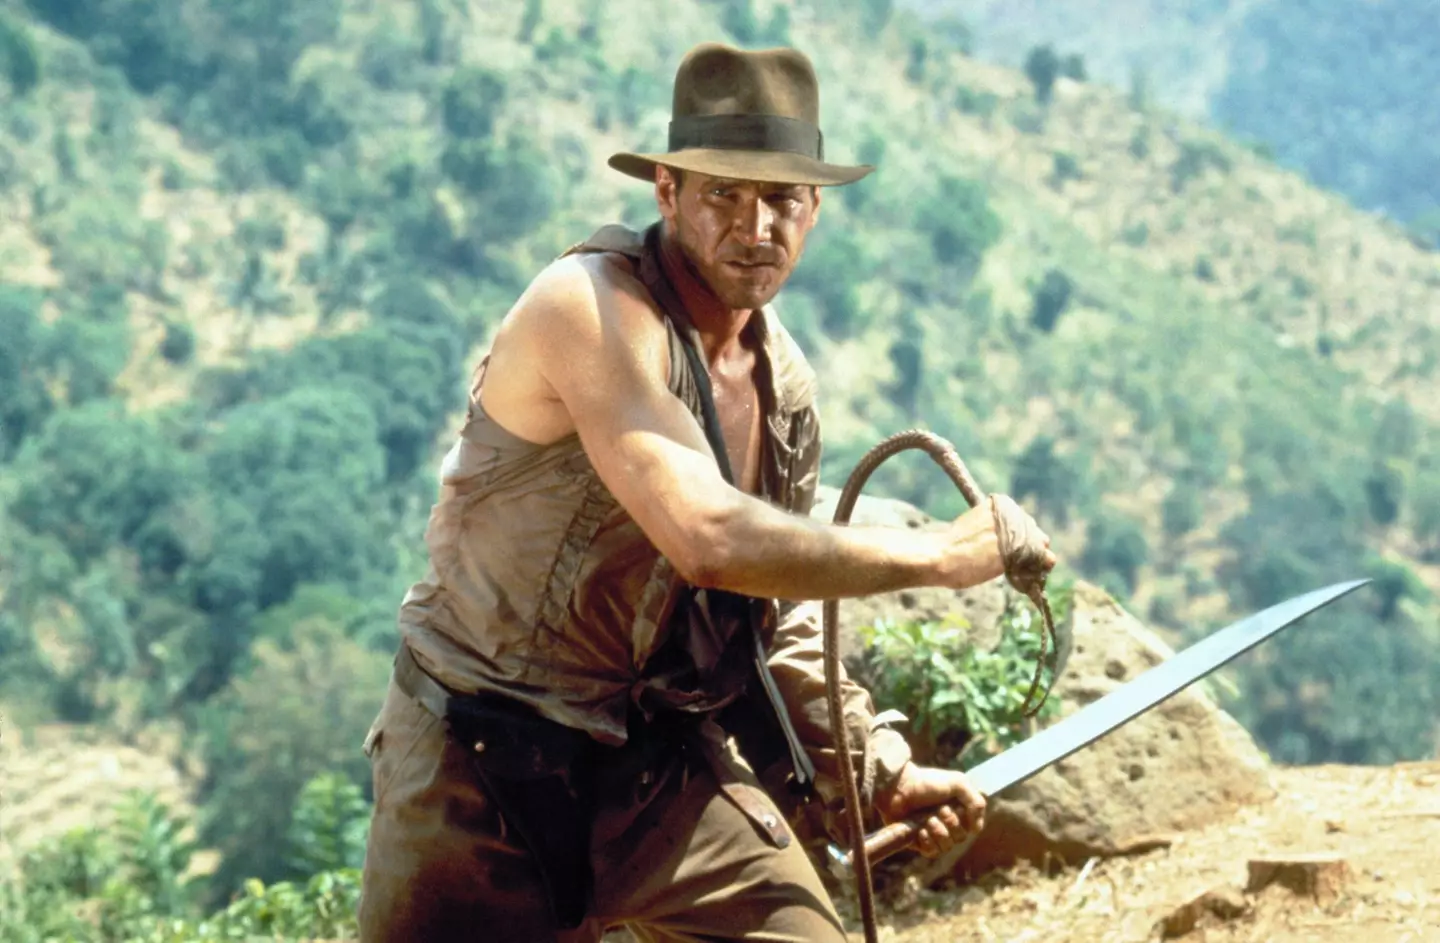 Harrison Ford in Indiana Jones and the Temple of Doom.